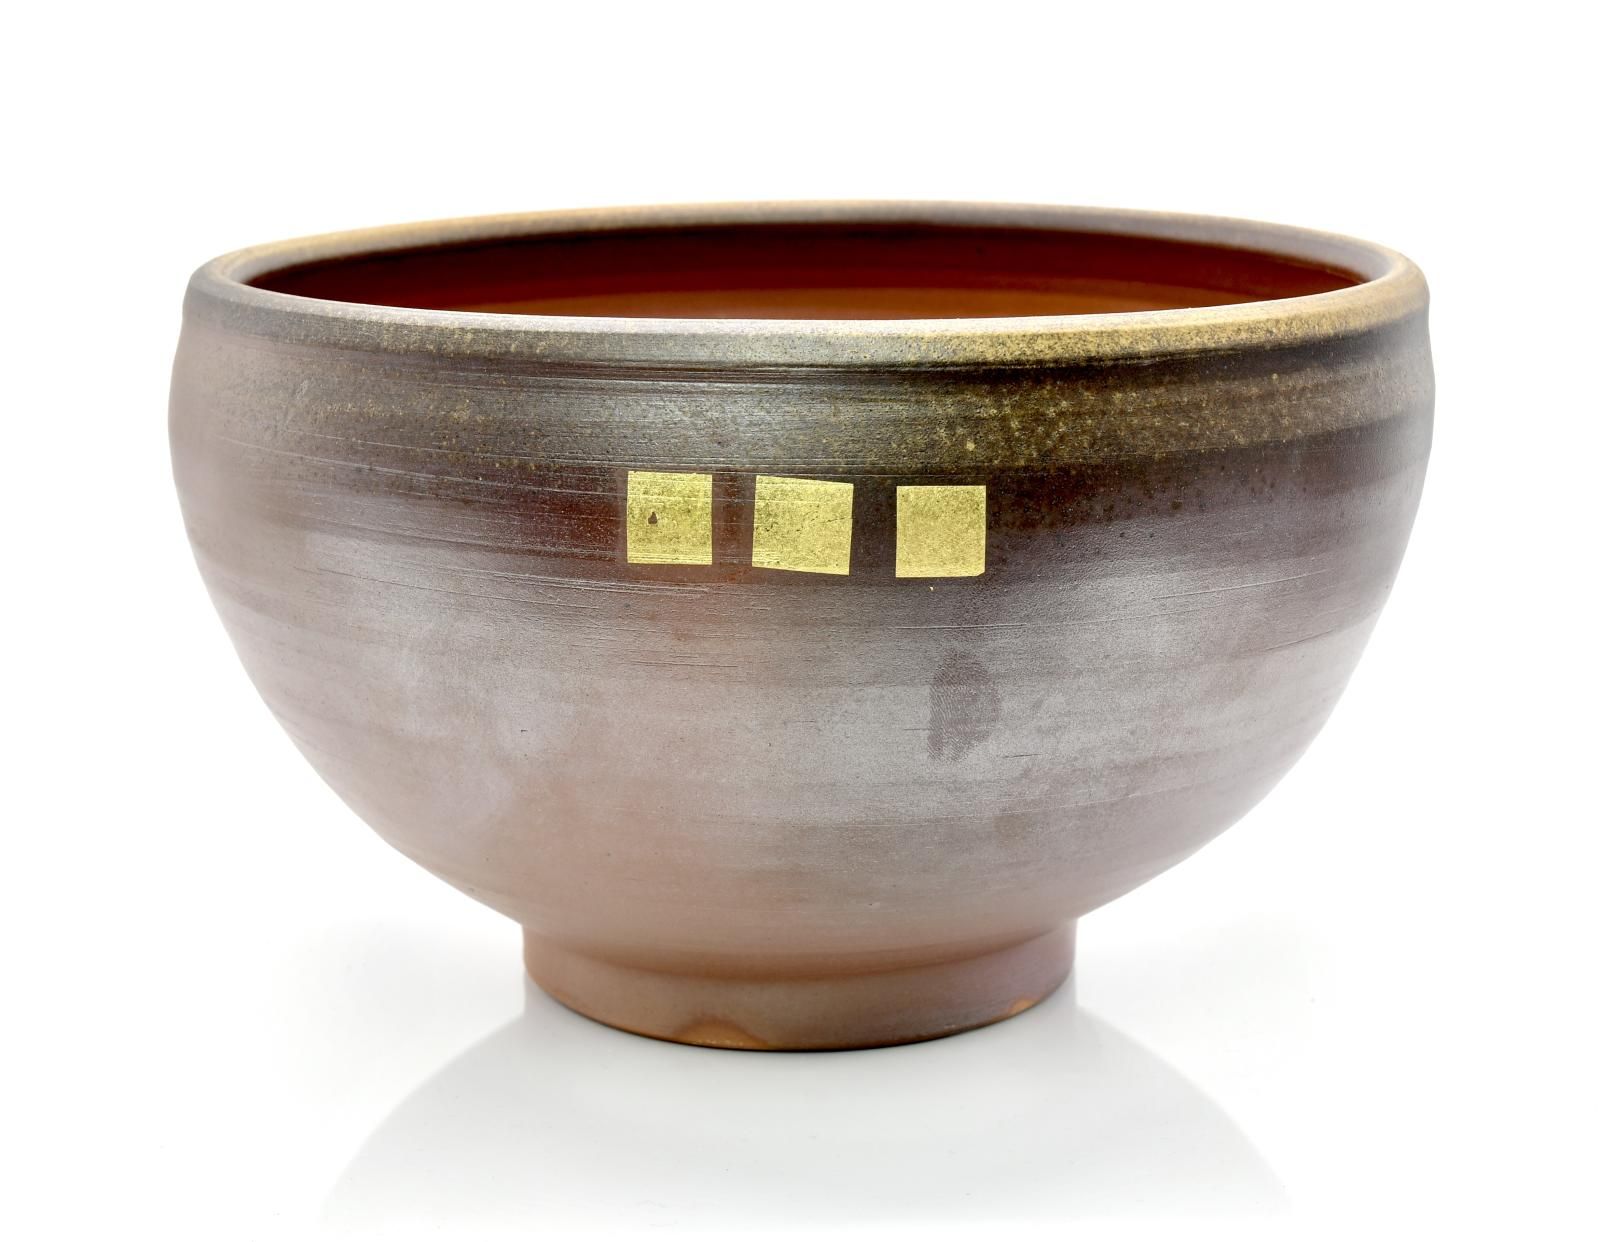 Bowl. unglazed, red collar overglaze and gold enamel, anagama fired by Yasuo Terada